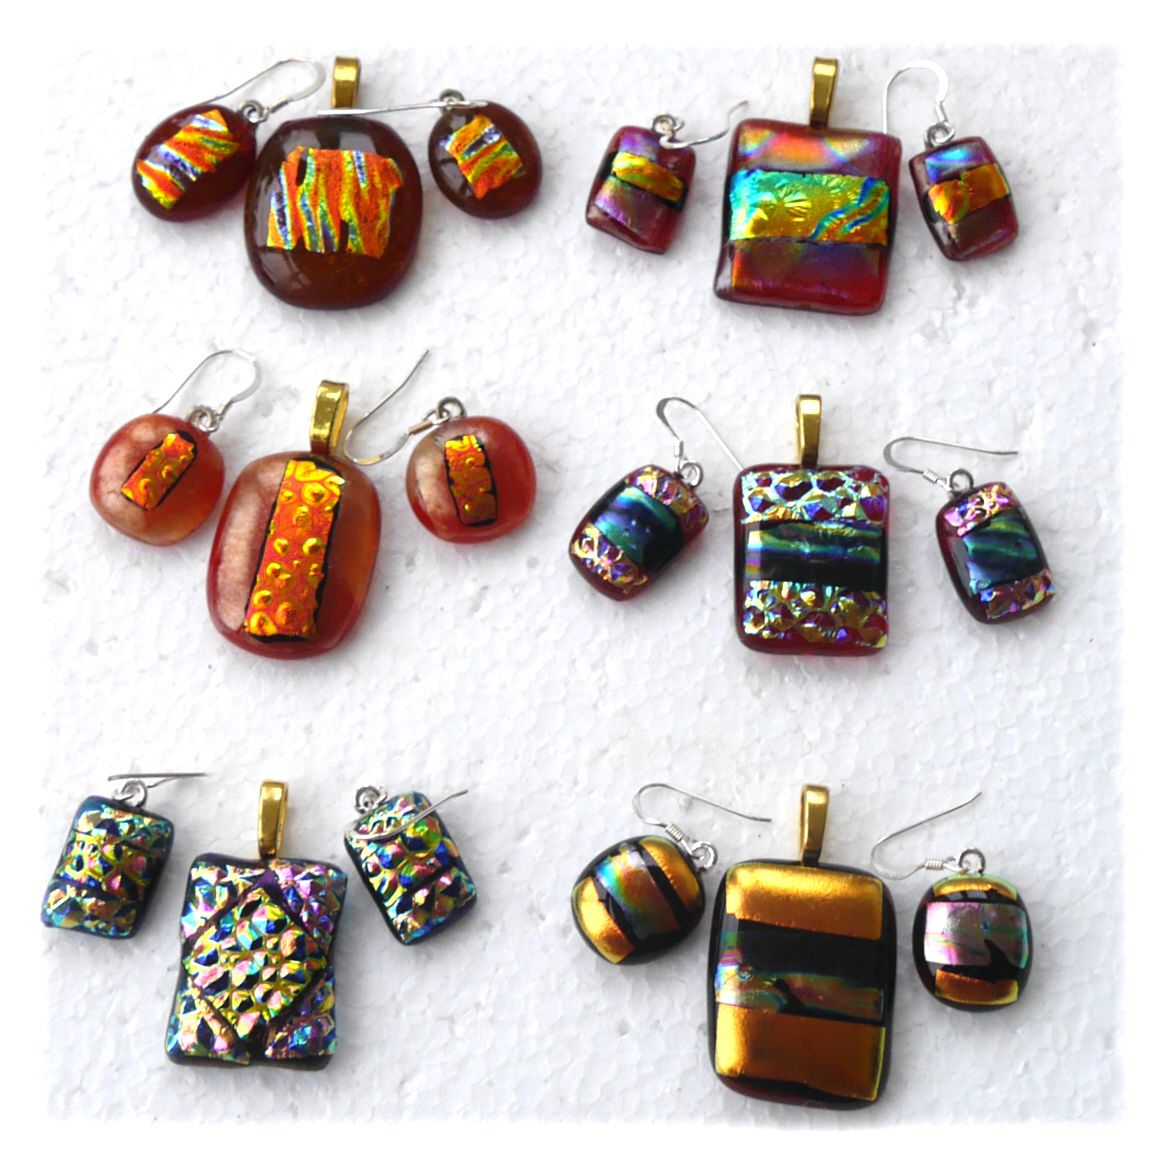 Dichroic Fused Glass Pendant Earring Set 2 Gold Chain 031 068 074 103 104 105